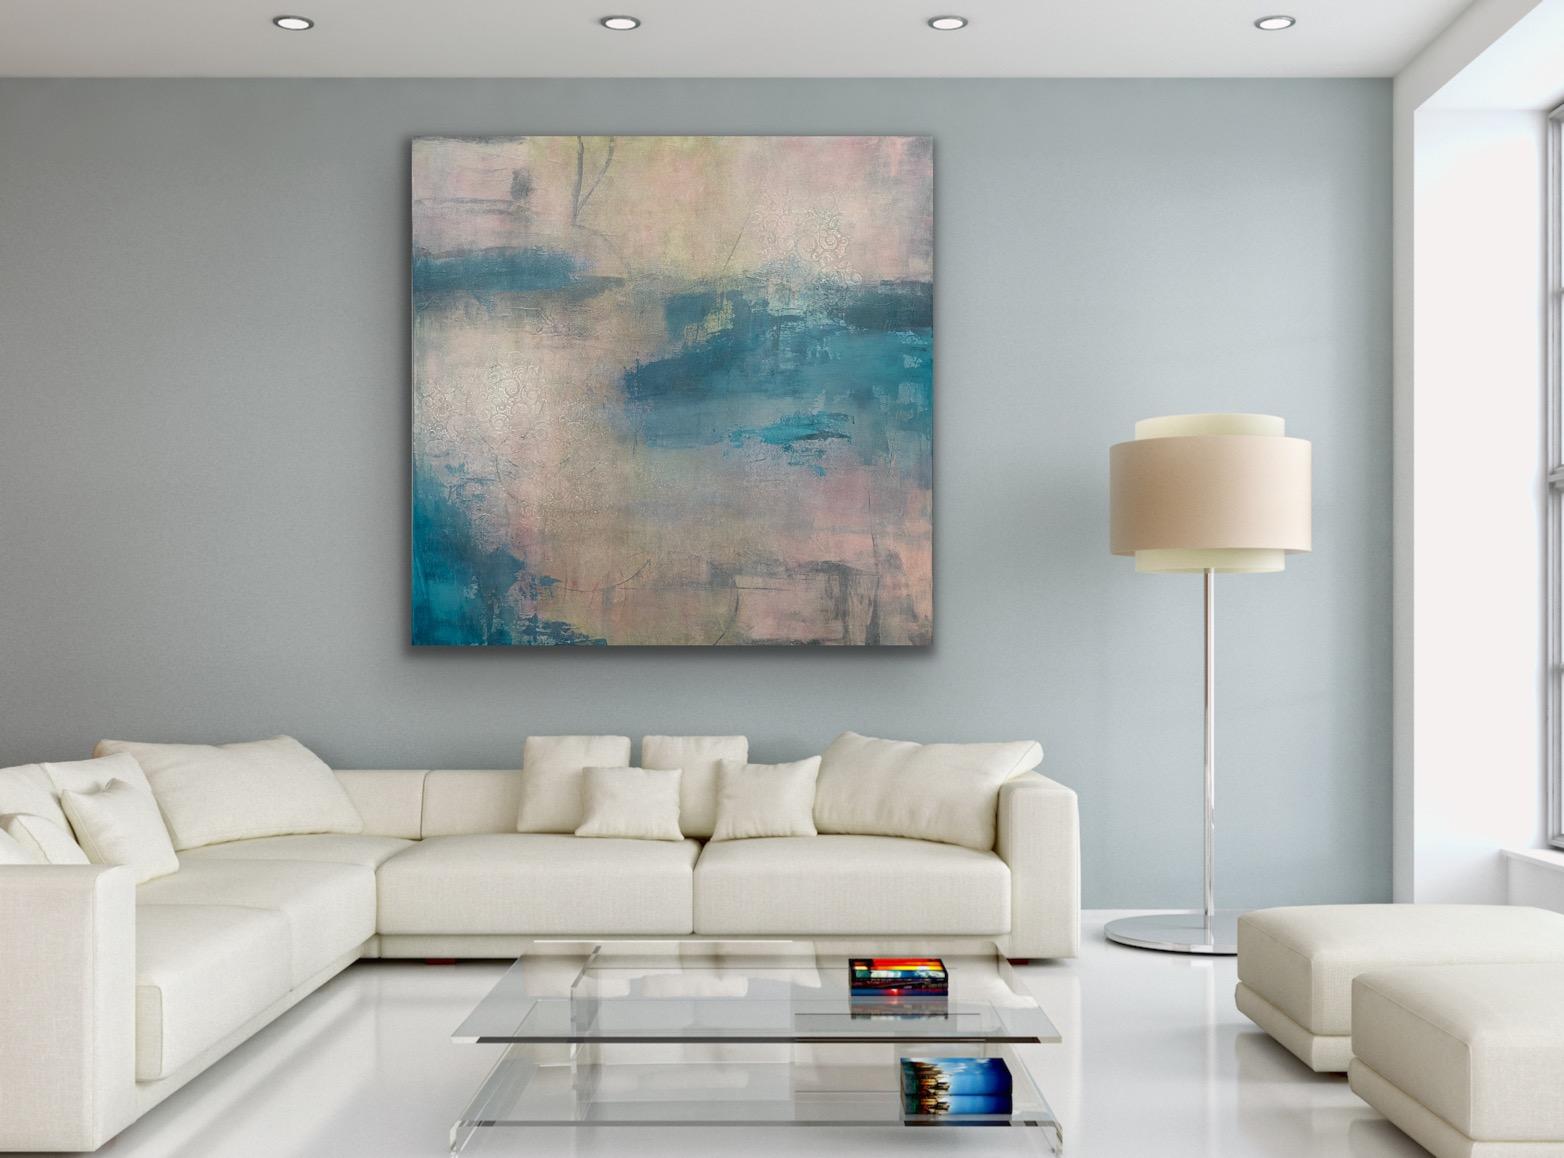 Sunrise on the bay, Contemporary seascape, blue, pink, reflective, asian flair For Sale 9